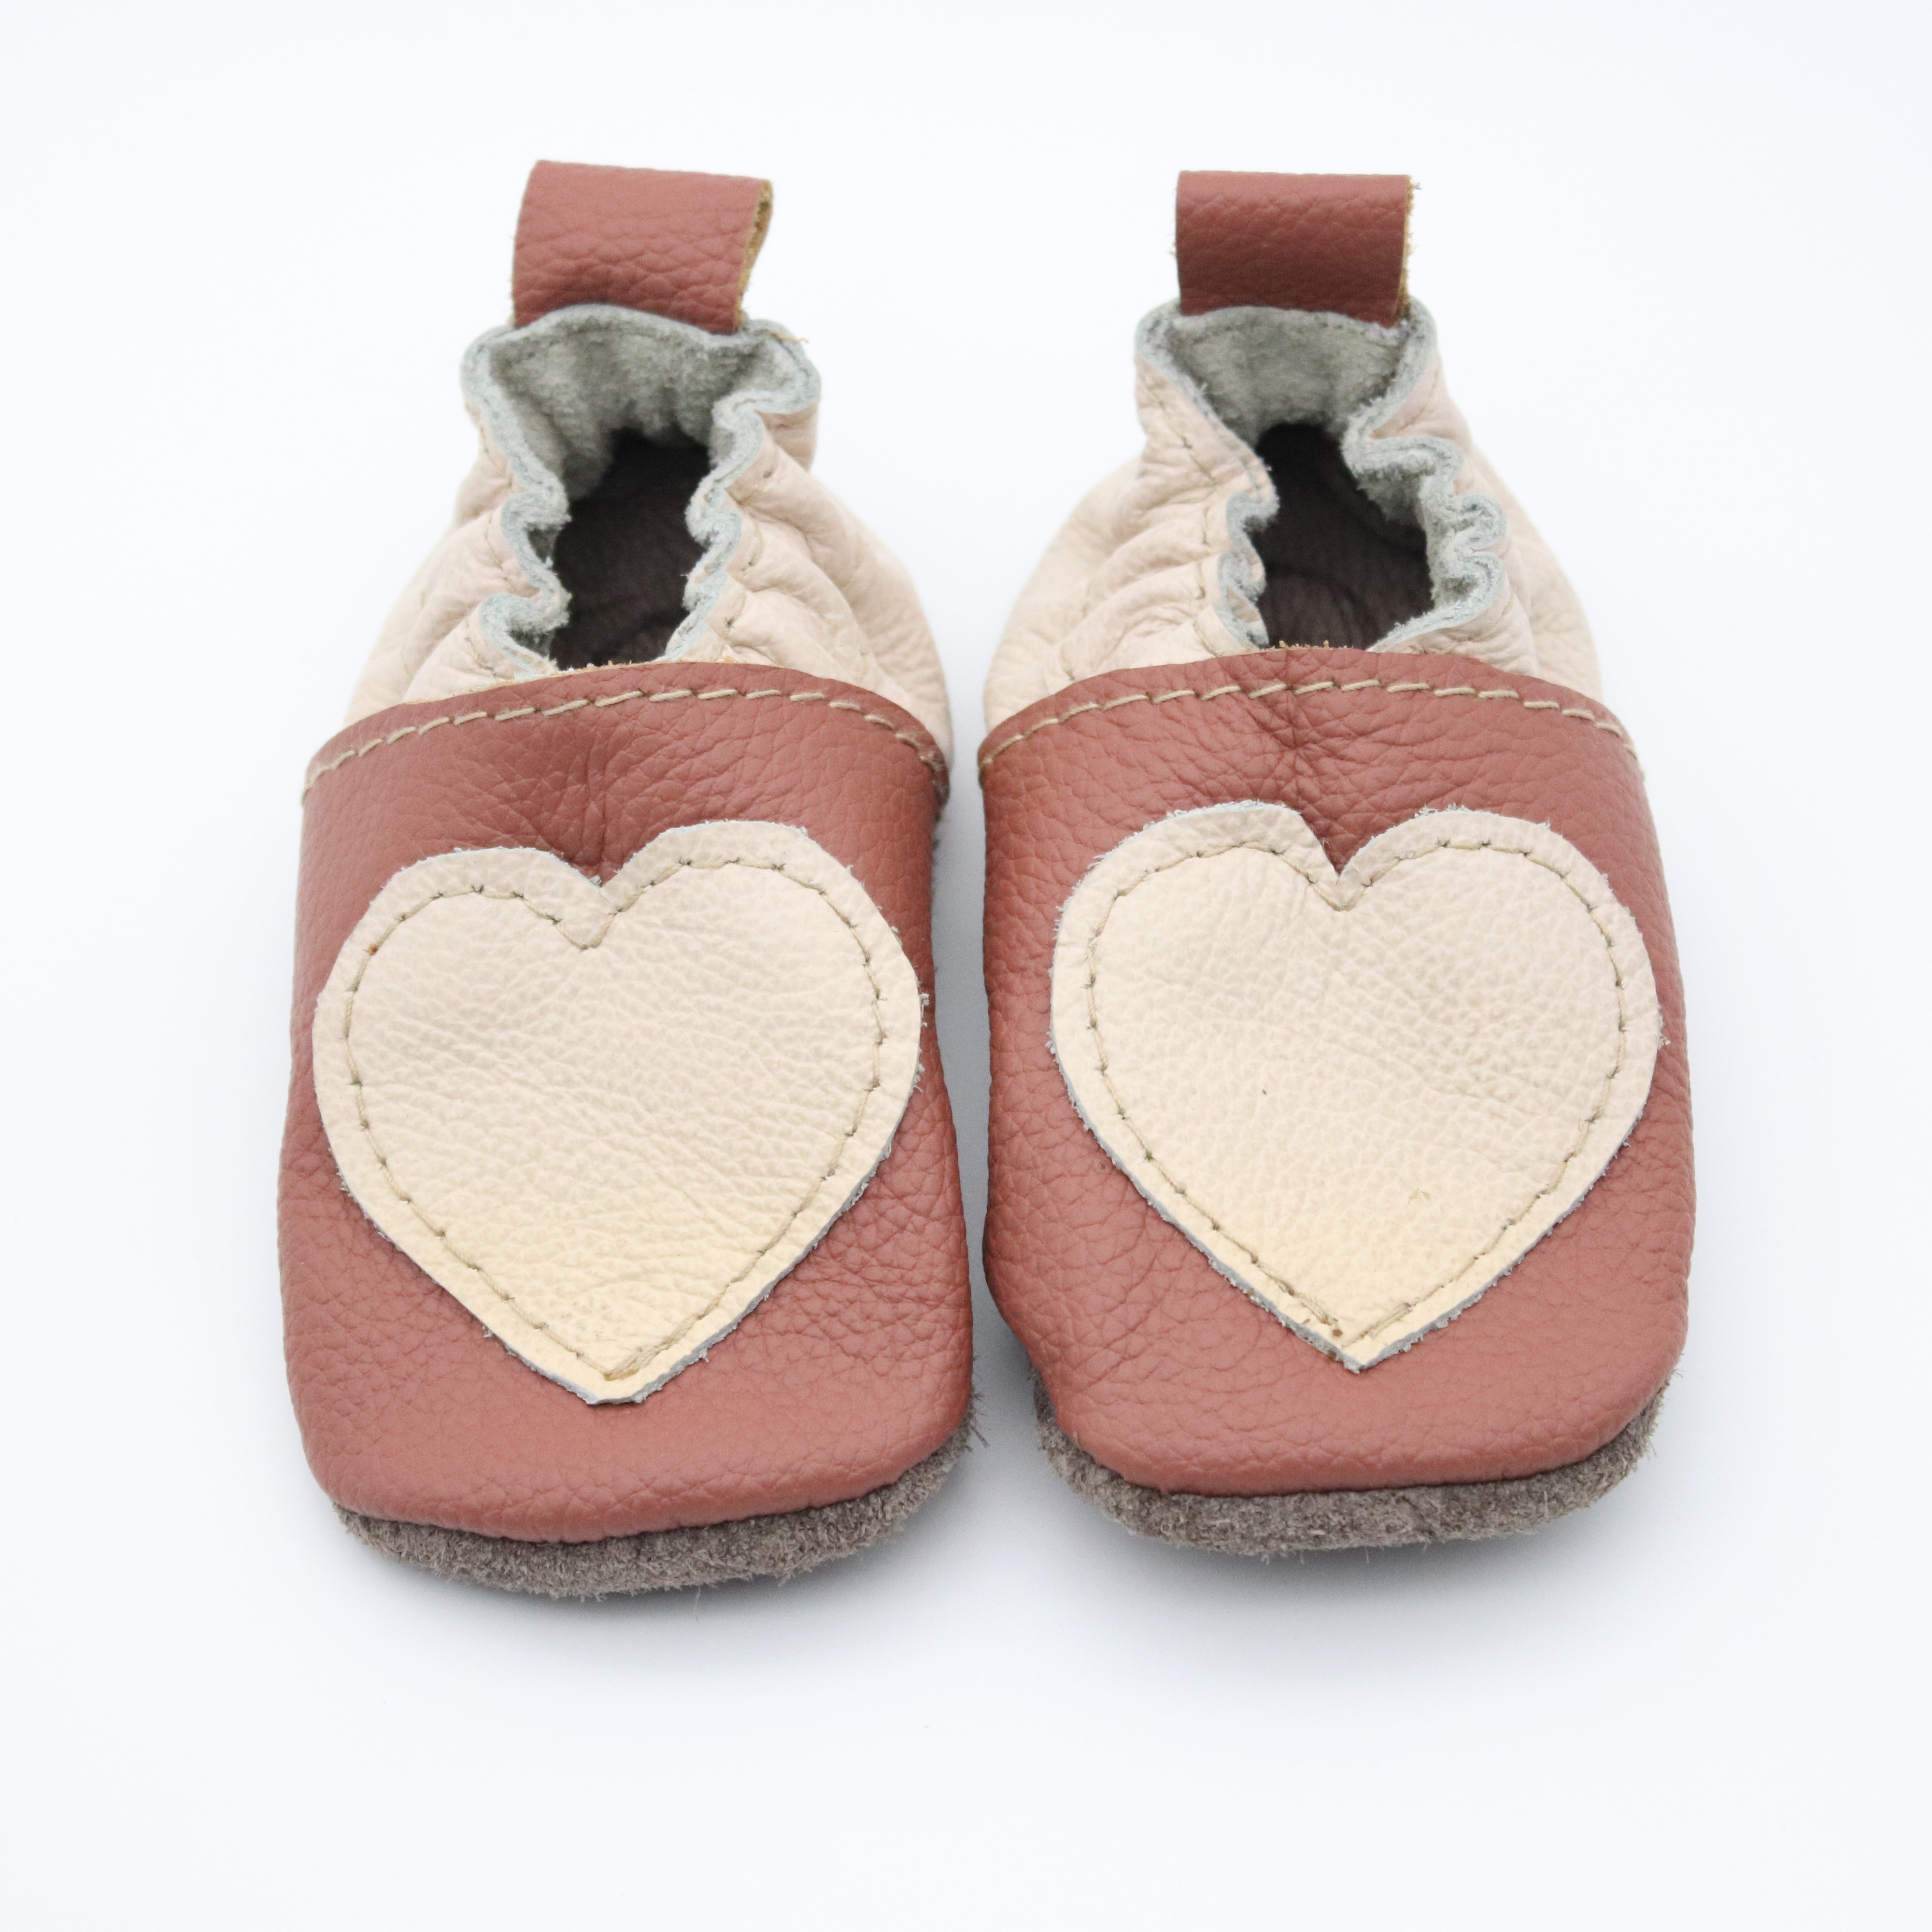 leather shoes for babies